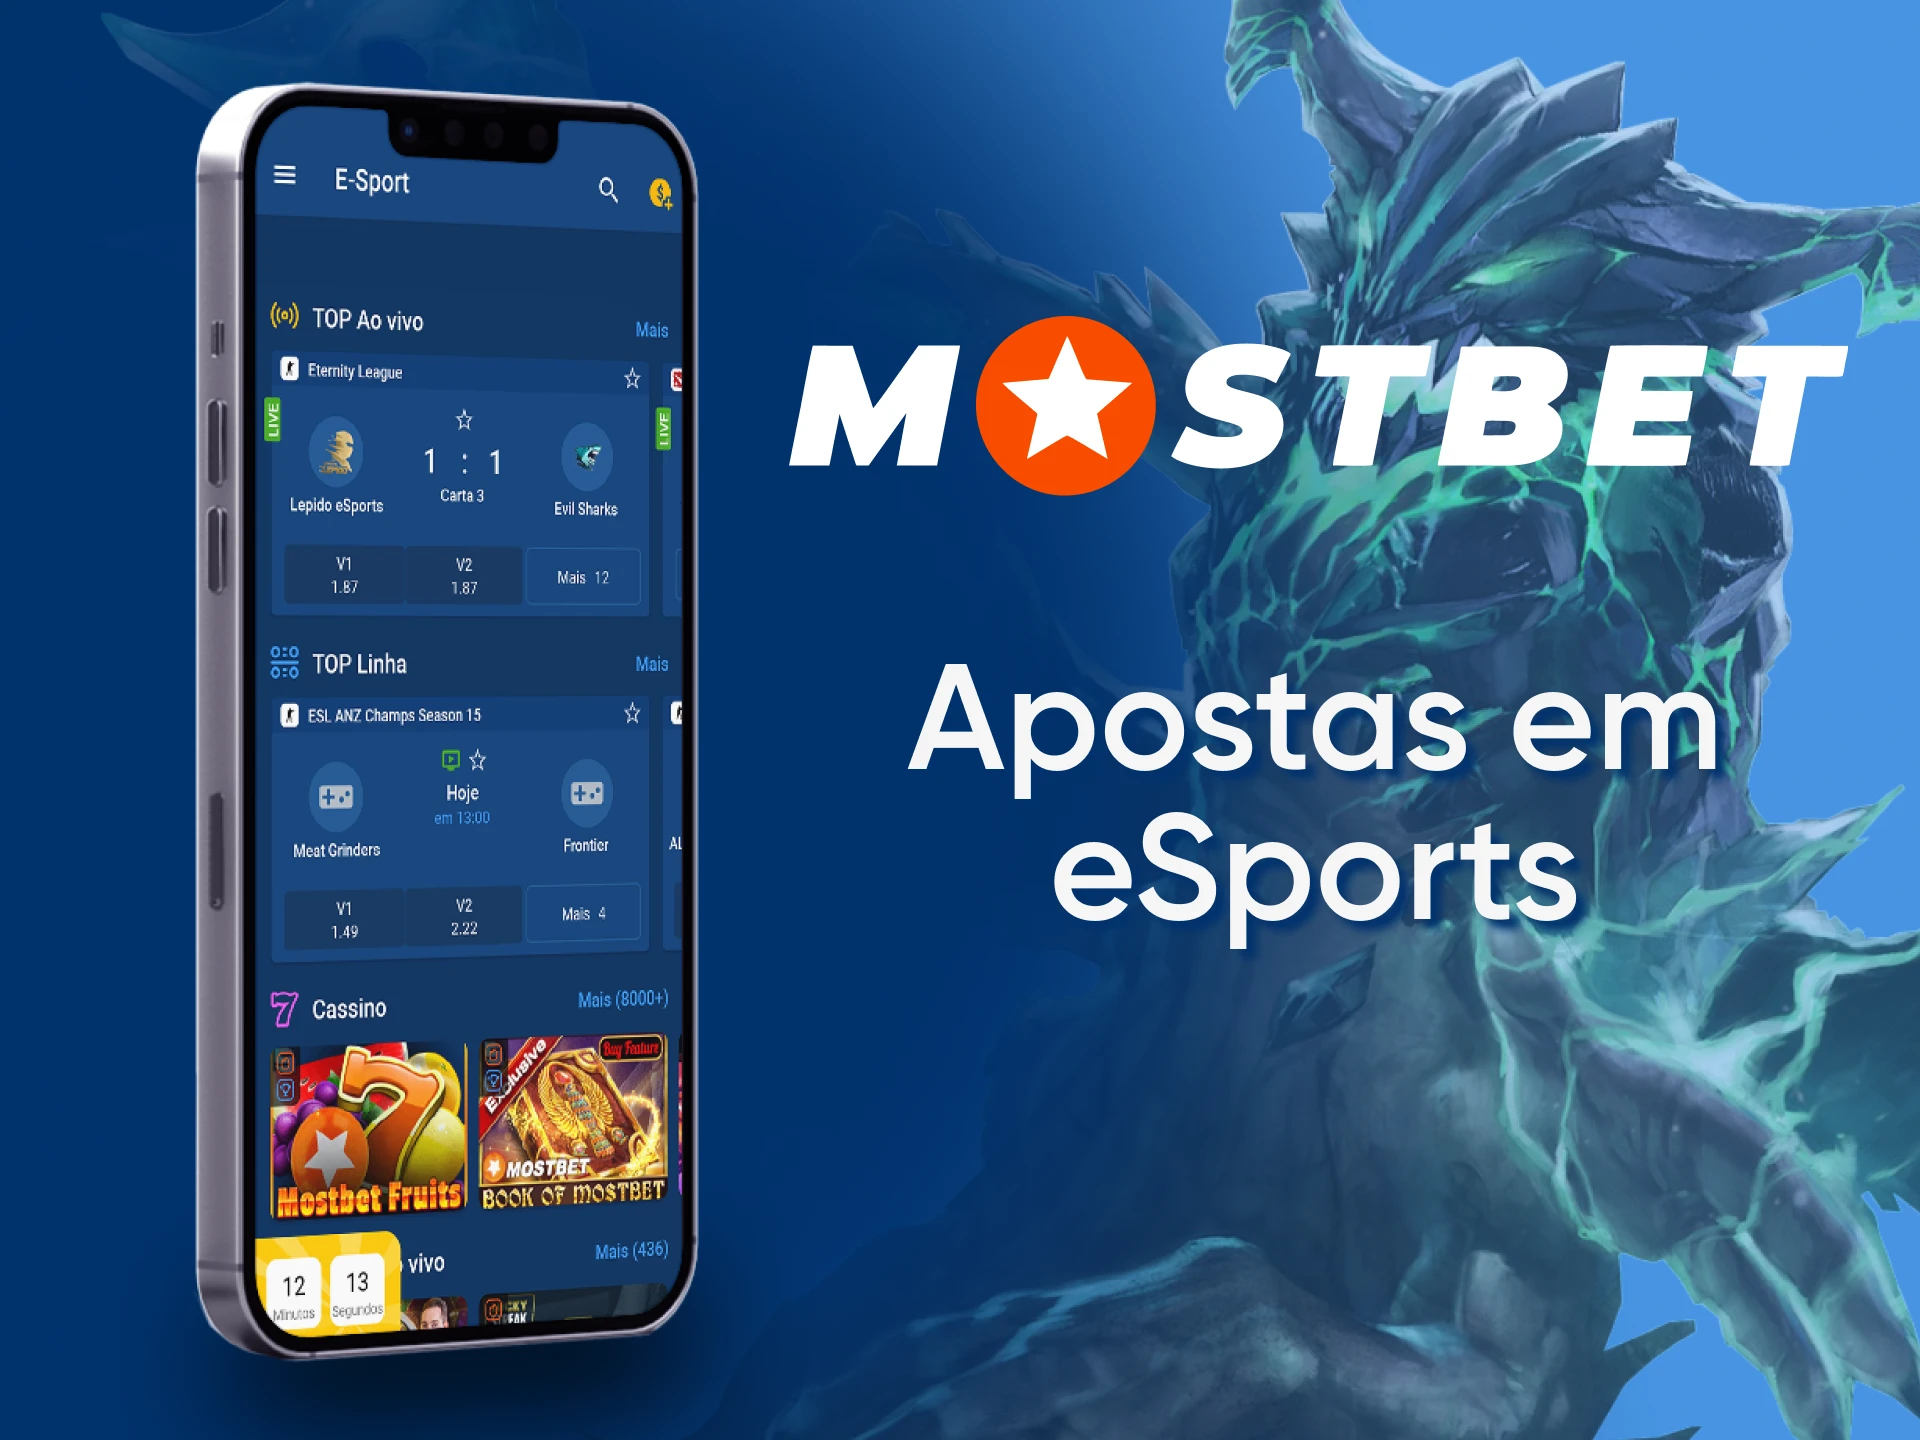 Bet on popular esports games on Mostbet.